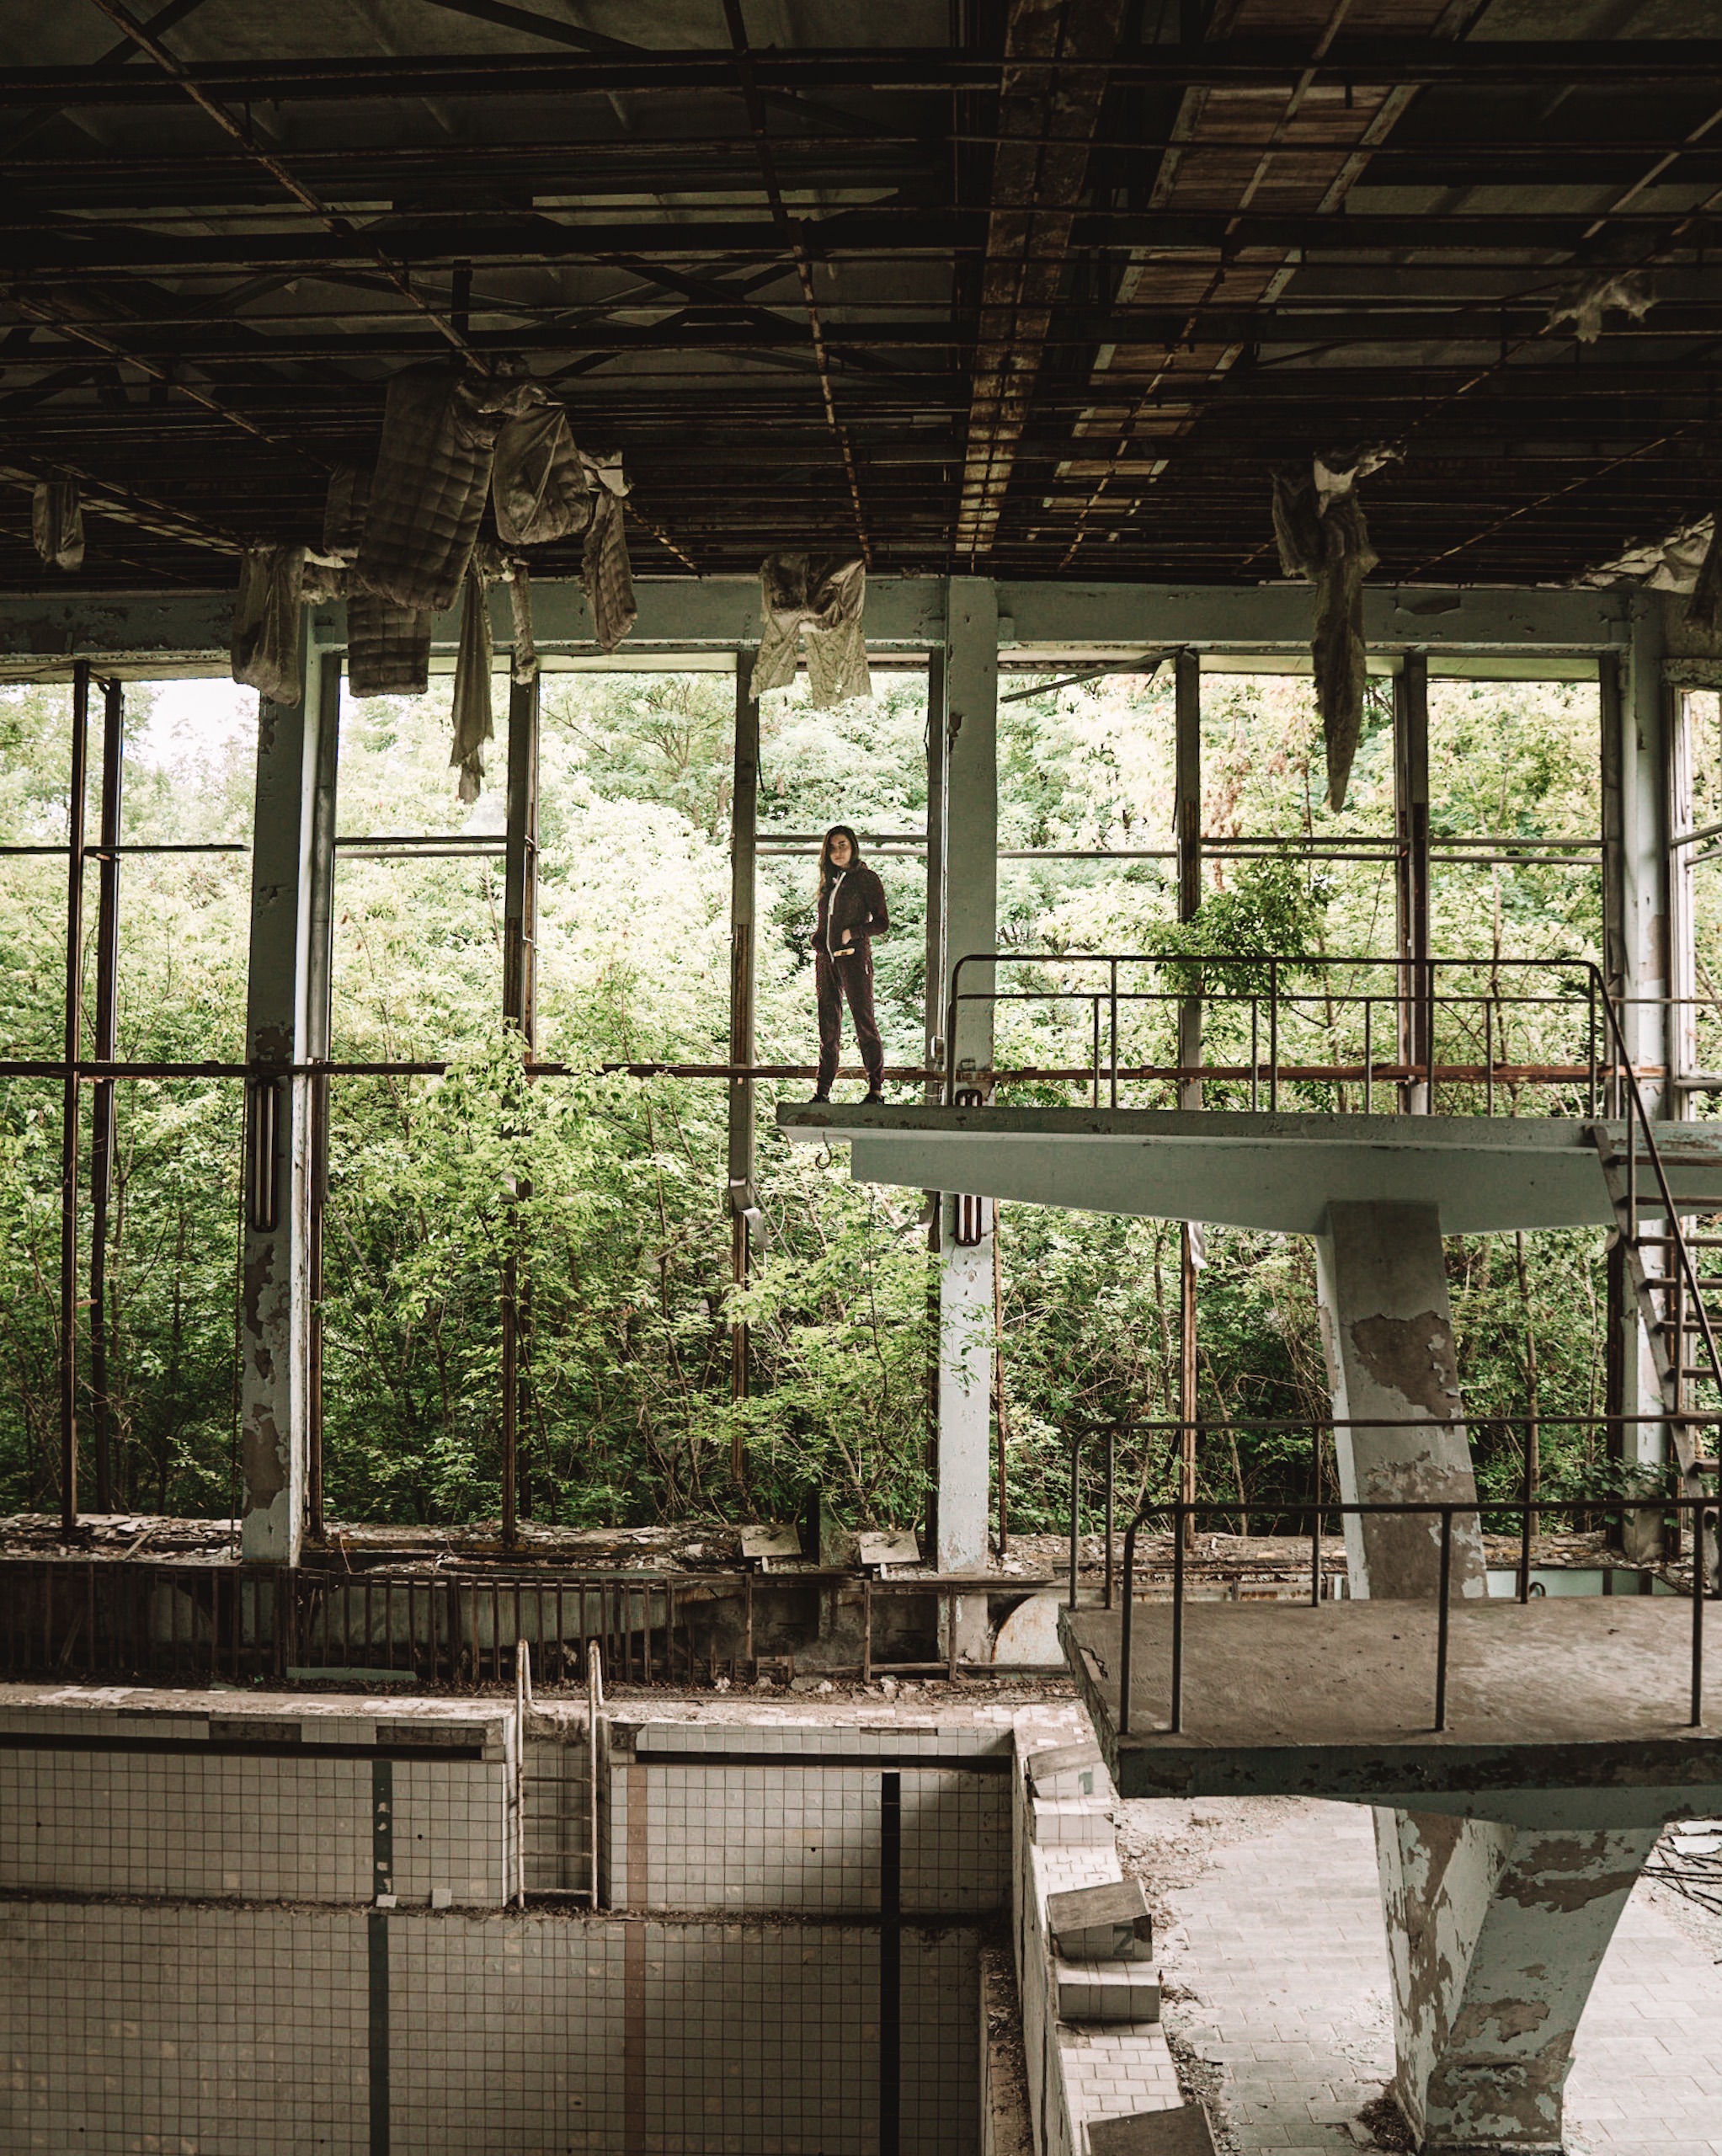 The abandoned pool in Pripyat is such an eerie sight in the Exclusion Zone